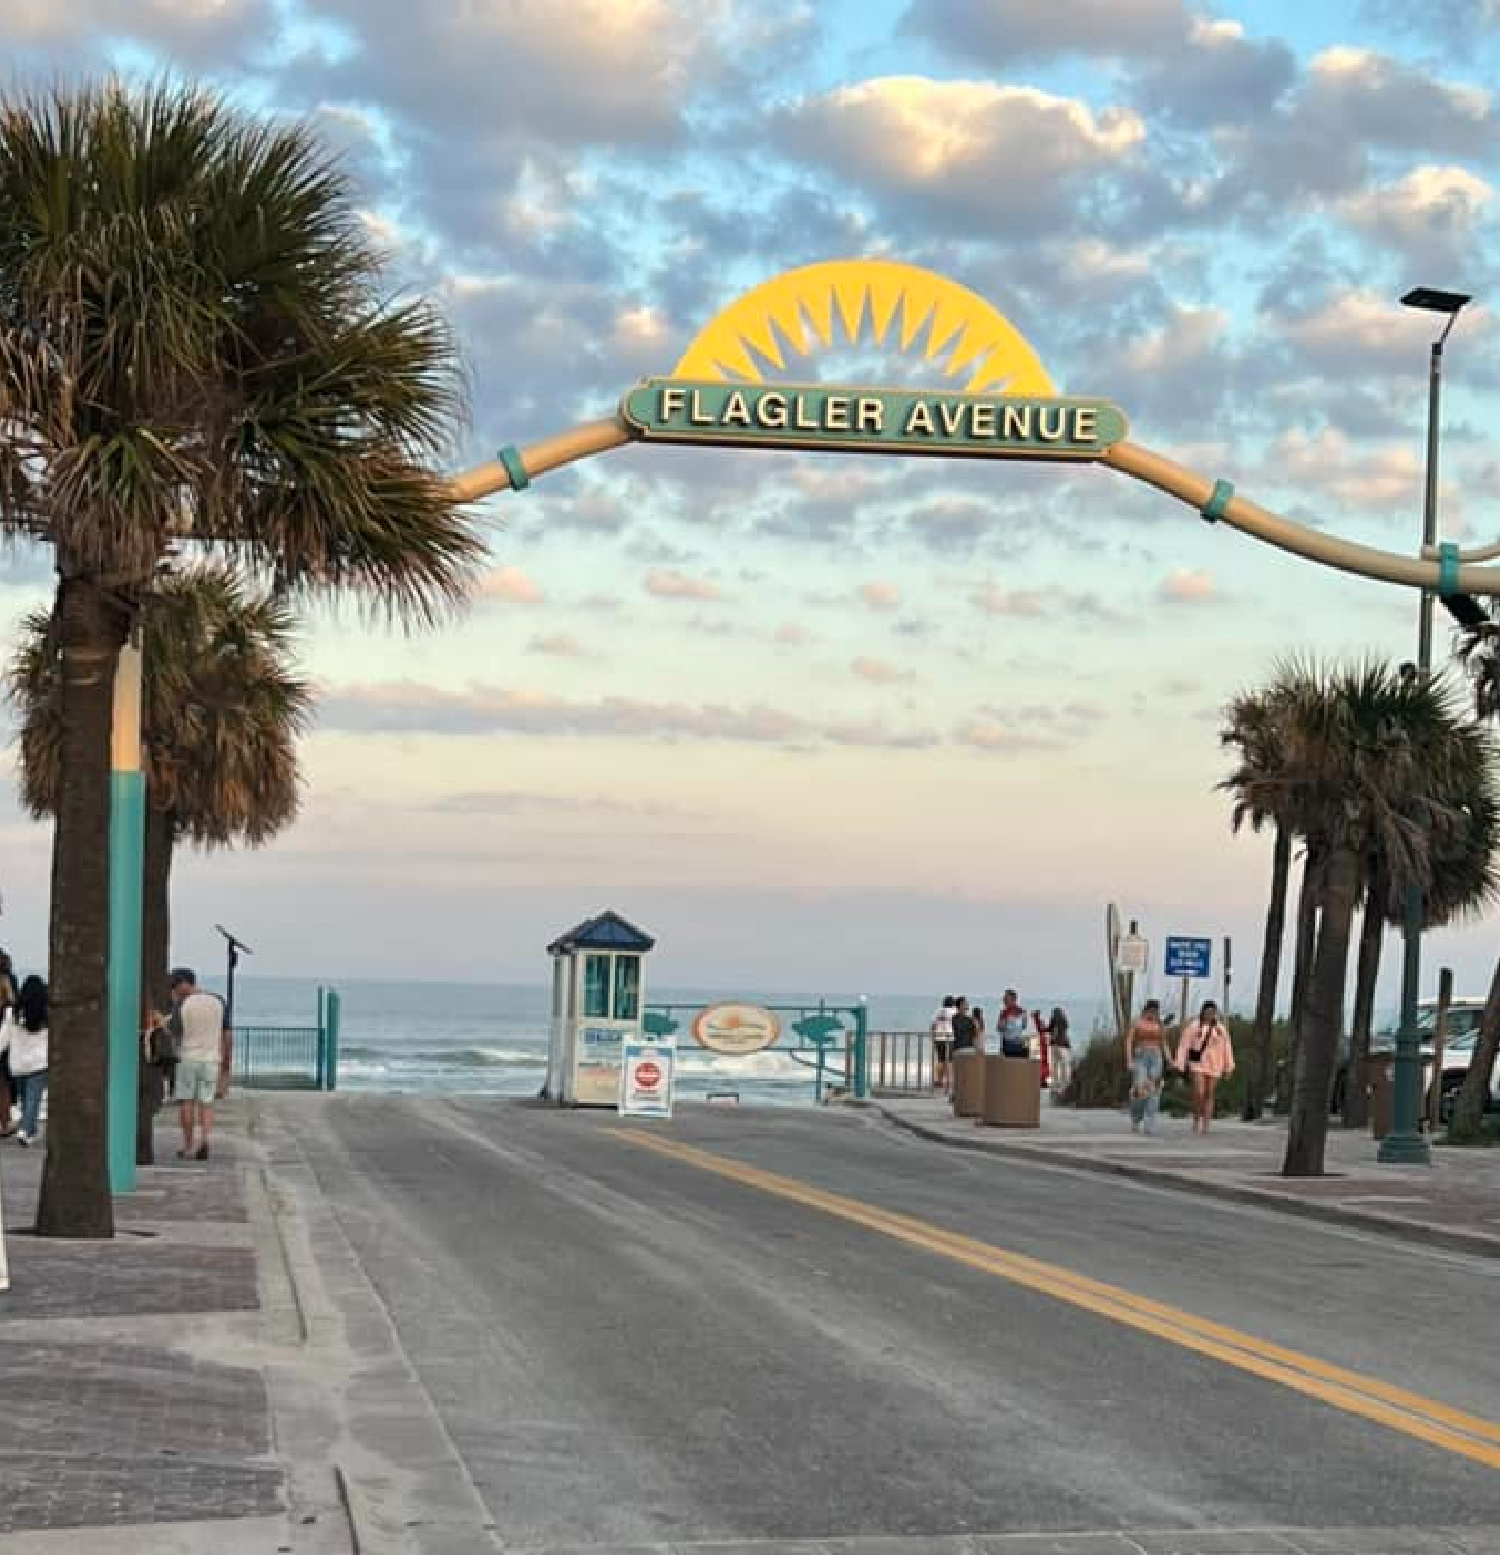 A street with palm trees and a sign that says beach avenue.